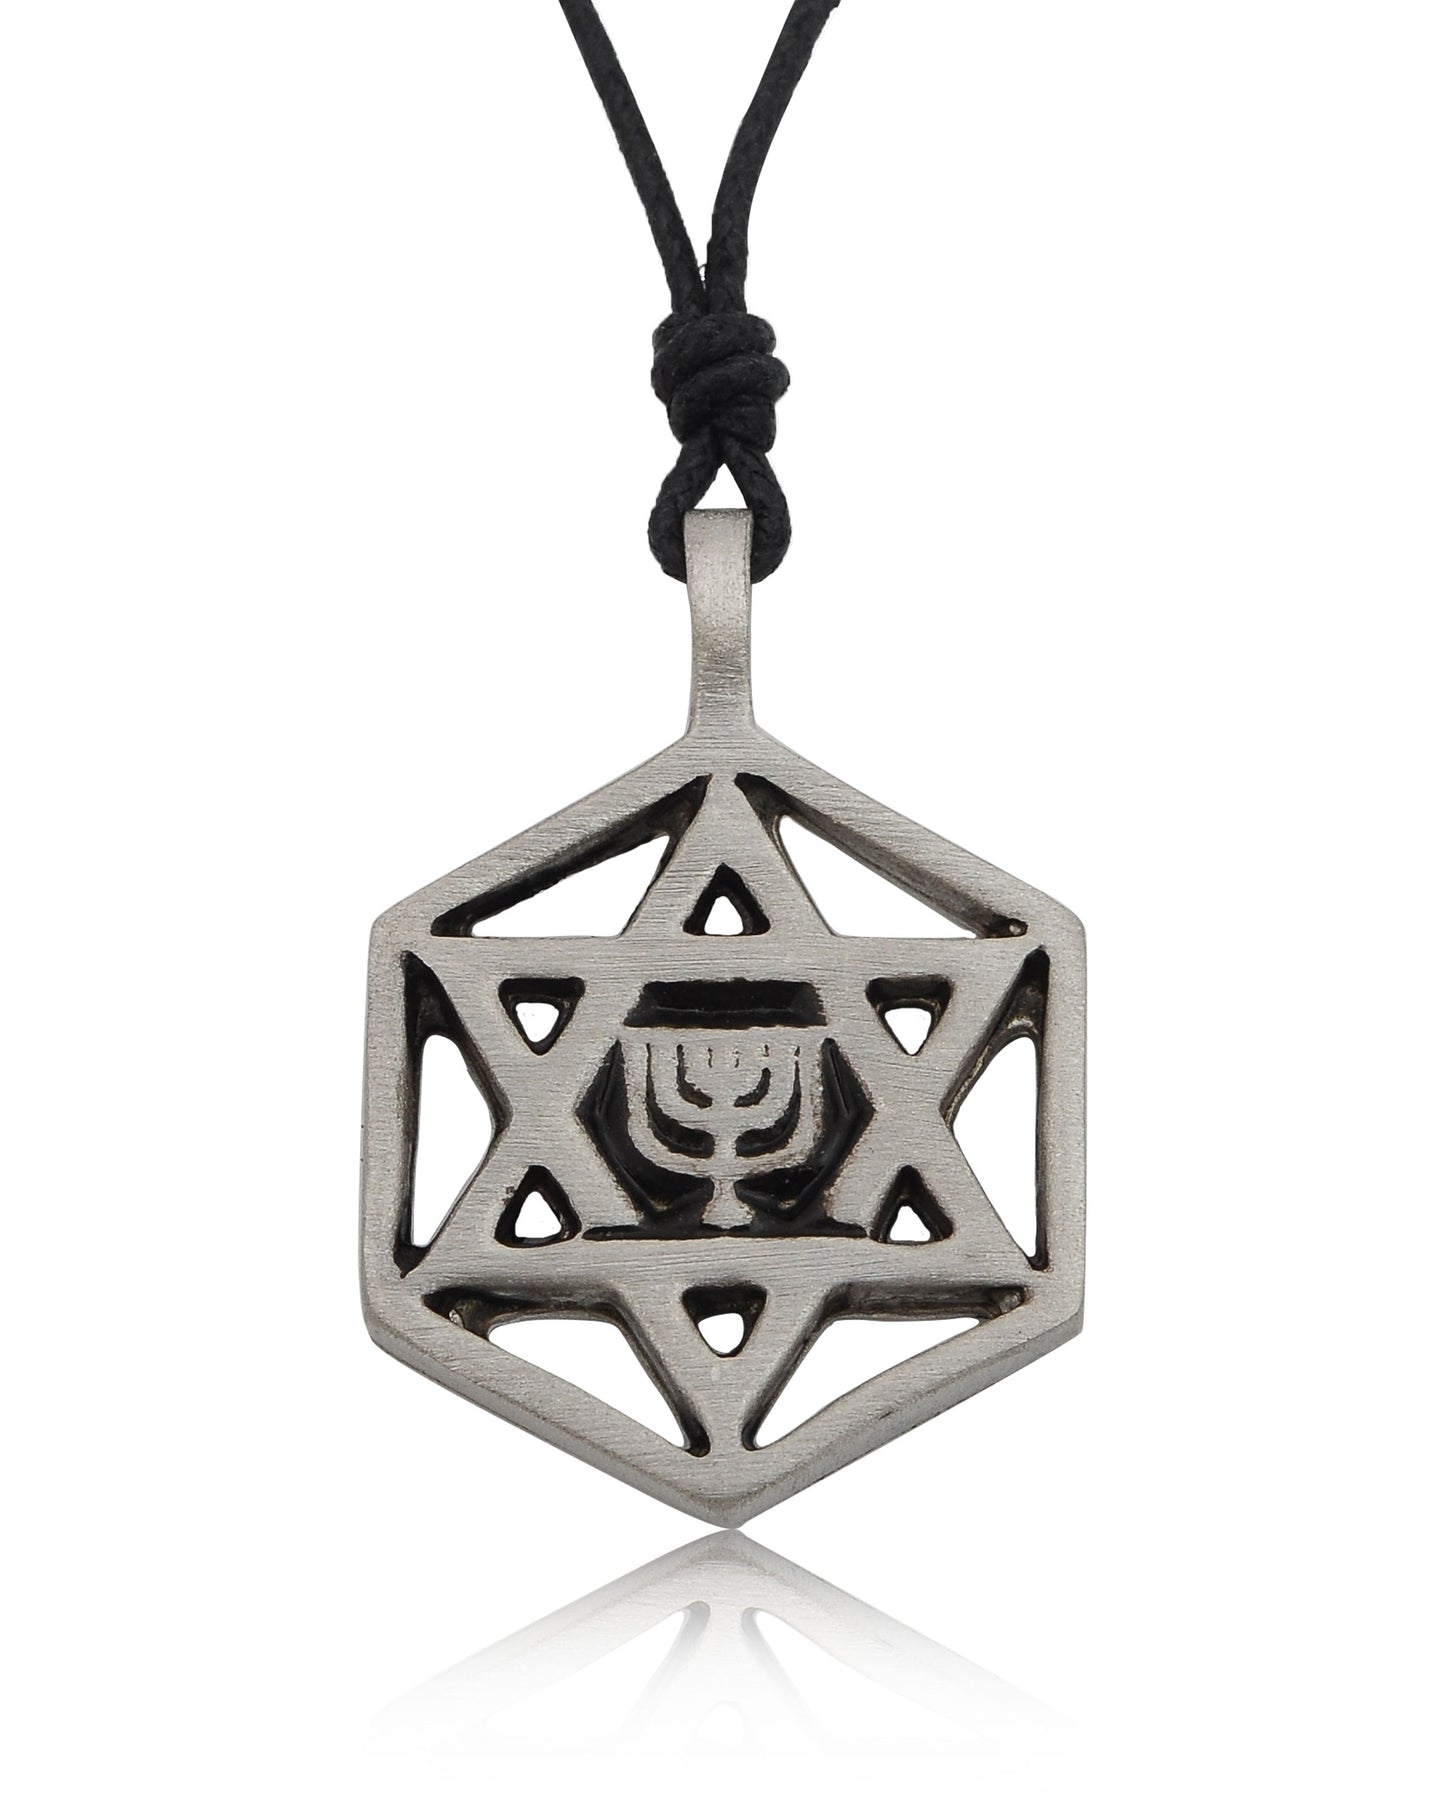 New Jewish Star of David Silver Pewter Charm Necklace Pendant Jewelry